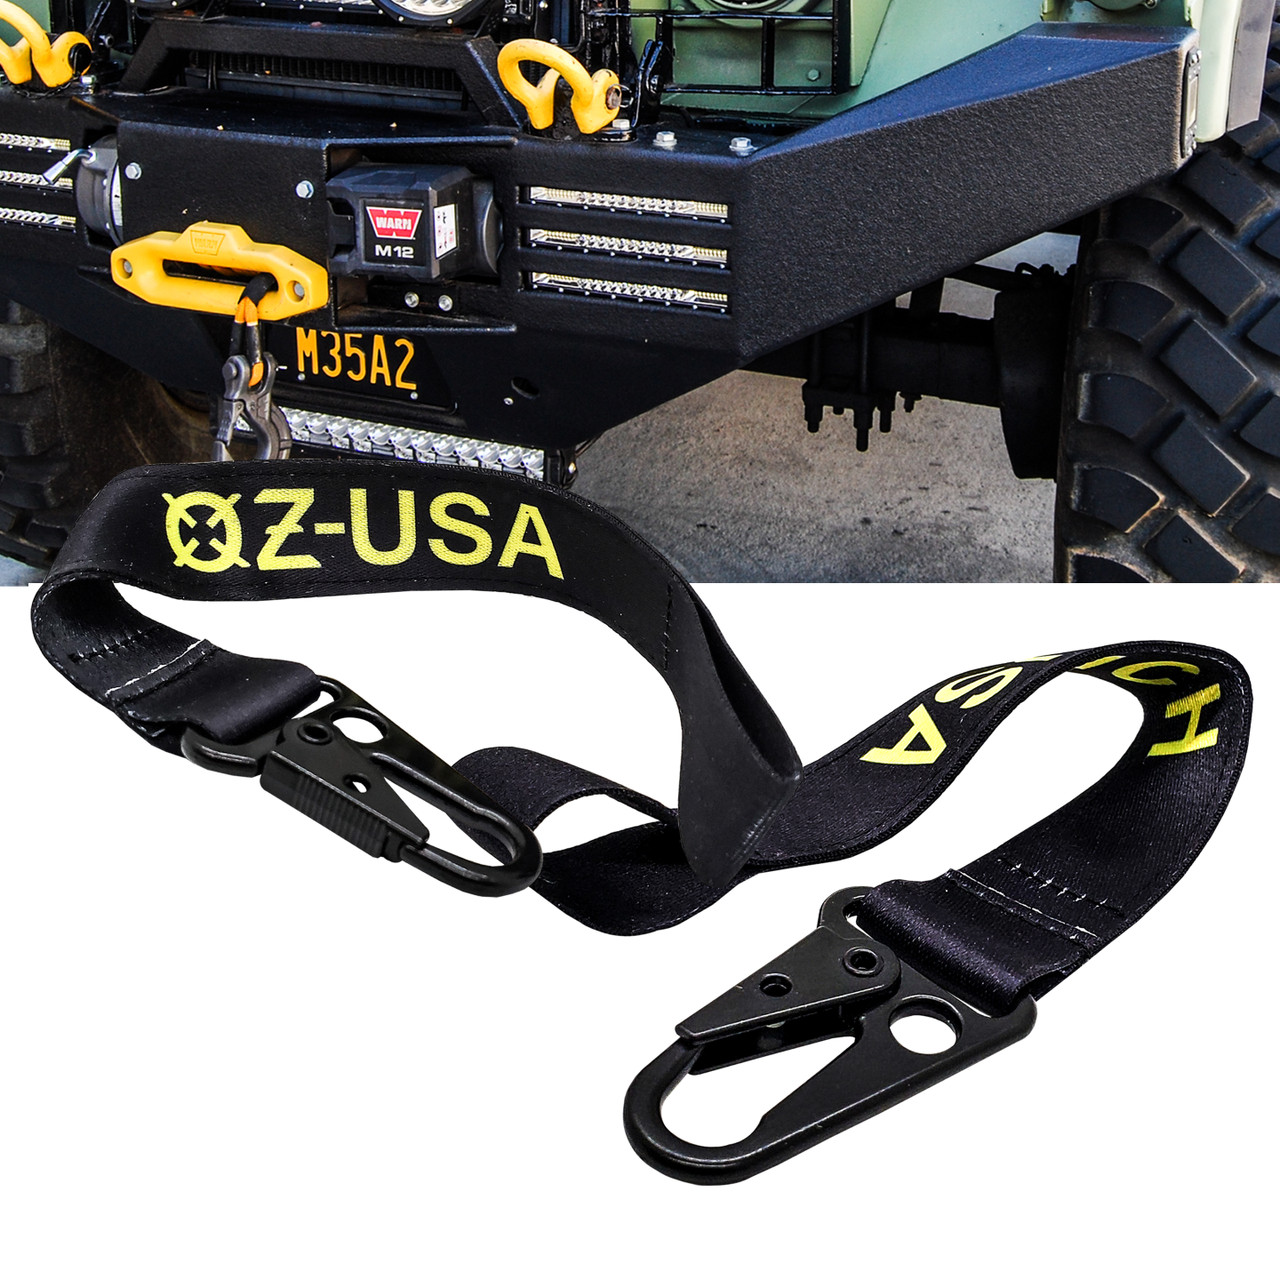 8 Winch Hook Tag Pull Safety Tie-Down Strap with Carabiner Clip